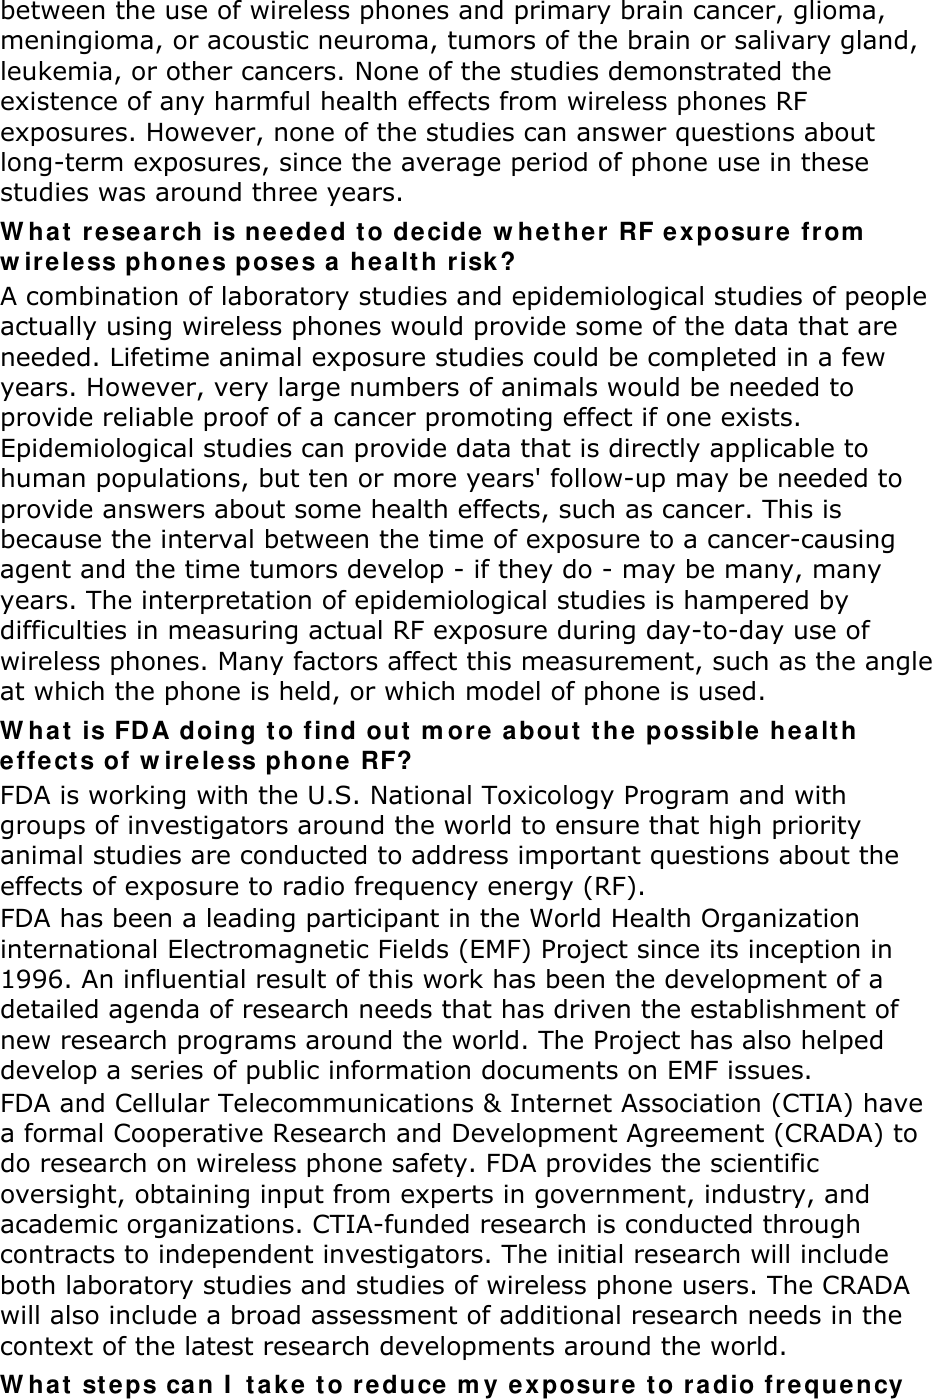 between the use of wireless phones and primary brain cancer, glioma, meningioma, or acoustic neuroma, tumors of the brain or salivary gland, leukemia, or other cancers. None of the studies demonstrated the existence of any harmful health effects from wireless phones RF exposures. However, none of the studies can answer questions about long-term exposures, since the average period of phone use in these studies was around three years. What research is needed to decide whether RF exposure from wireless phones poses a health risk? A combination of laboratory studies and epidemiological studies of people actually using wireless phones would provide some of the data that are needed. Lifetime animal exposure studies could be completed in a few years. However, very large numbers of animals would be needed to provide reliable proof of a cancer promoting effect if one exists. Epidemiological studies can provide data that is directly applicable to human populations, but ten or more years&apos; follow-up may be needed to provide answers about some health effects, such as cancer. This is because the interval between the time of exposure to a cancer-causing agent and the time tumors develop - if they do - may be many, many years. The interpretation of epidemiological studies is hampered by difficulties in measuring actual RF exposure during day-to-day use of wireless phones. Many factors affect this measurement, such as the angle at which the phone is held, or which model of phone is used. What is FDA doing to find out more about the possible health effects of wireless phone RF? FDA is working with the U.S. National Toxicology Program and with groups of investigators around the world to ensure that high priority animal studies are conducted to address important questions about the effects of exposure to radio frequency energy (RF). FDA has been a leading participant in the World Health Organization international Electromagnetic Fields (EMF) Project since its inception in 1996. An influential result of this work has been the development of a detailed agenda of research needs that has driven the establishment of new research programs around the world. The Project has also helped develop a series of public information documents on EMF issues. FDA and Cellular Telecommunications &amp; Internet Association (CTIA) have a formal Cooperative Research and Development Agreement (CRADA) to do research on wireless phone safety. FDA provides the scientific oversight, obtaining input from experts in government, industry, and academic organizations. CTIA-funded research is conducted through contracts to independent investigators. The initial research will include both laboratory studies and studies of wireless phone users. The CRADA will also include a broad assessment of additional research needs in the context of the latest research developments around the world. What steps can I take to reduce my exposure to radio frequency 